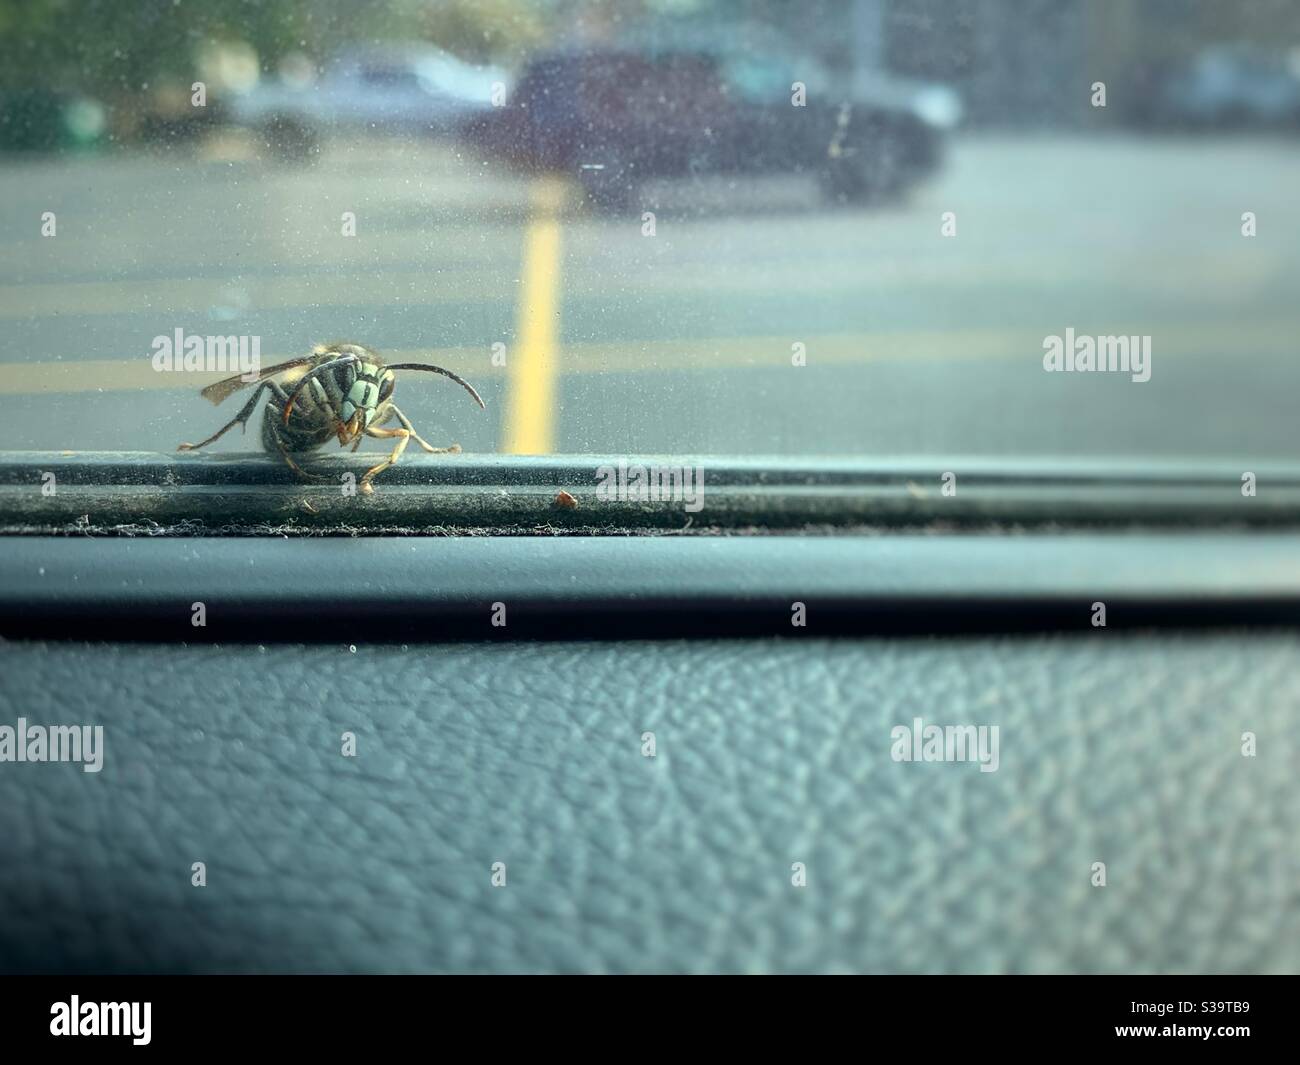 Wasp looking inside the car window. Stock Photo